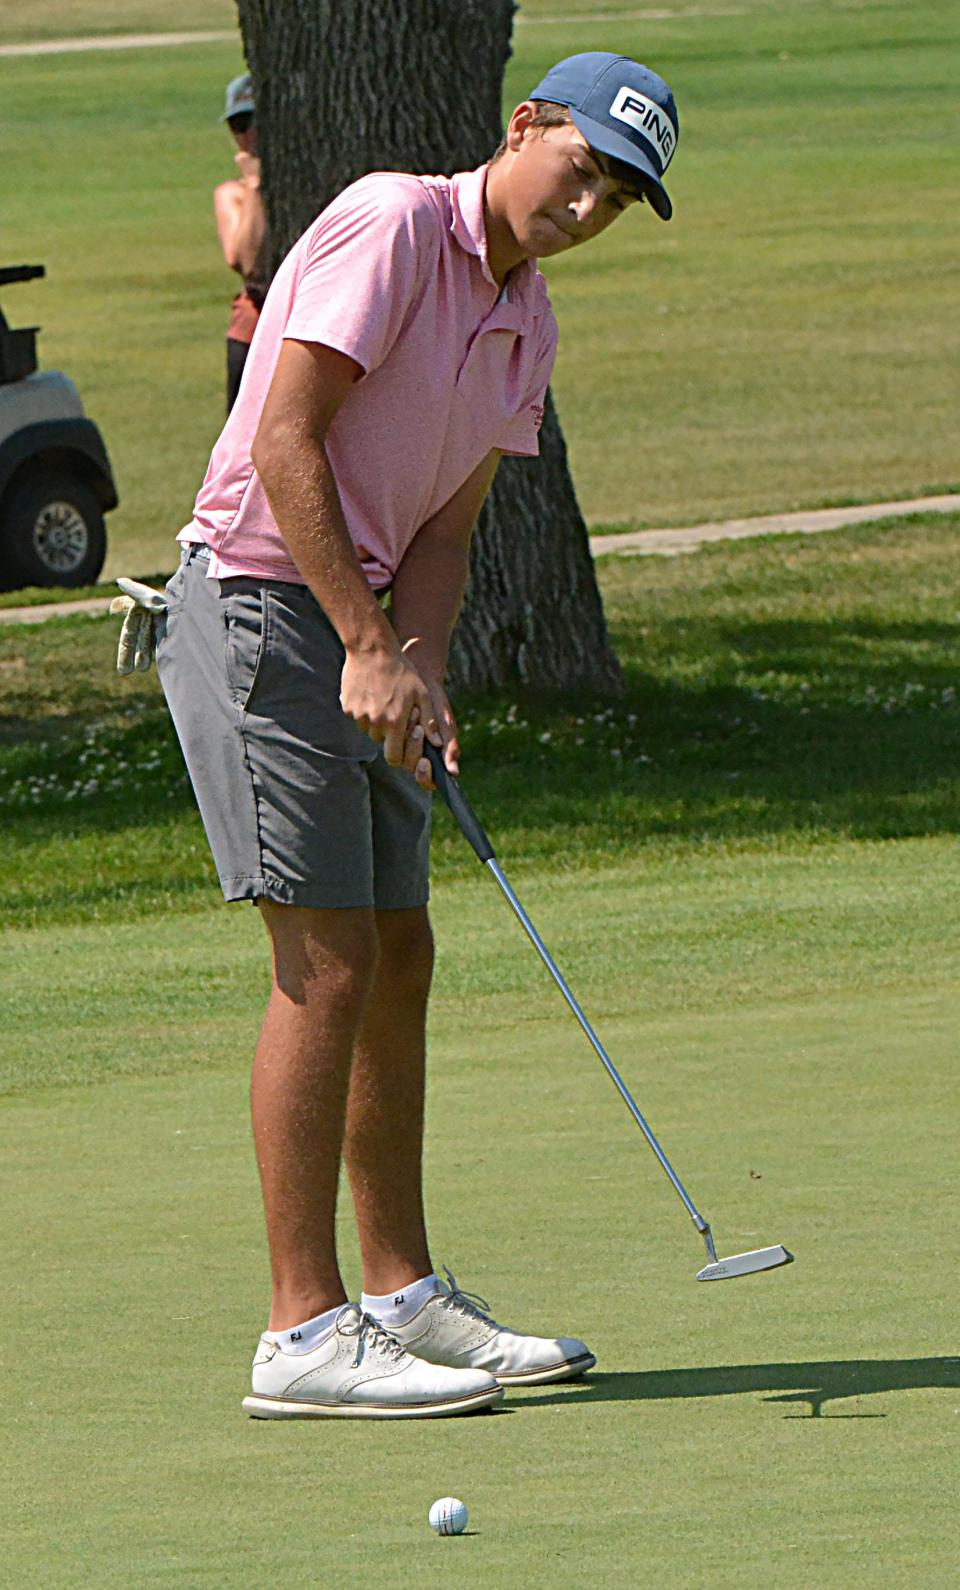 Finn Anderson of Aberdeen watches his putt on No.  1 Red during 14-15 boys division play in the South Dakota Golf Association's Junior Championship at Cattail Crossing Golf Course on Monday, July 24, 2023.